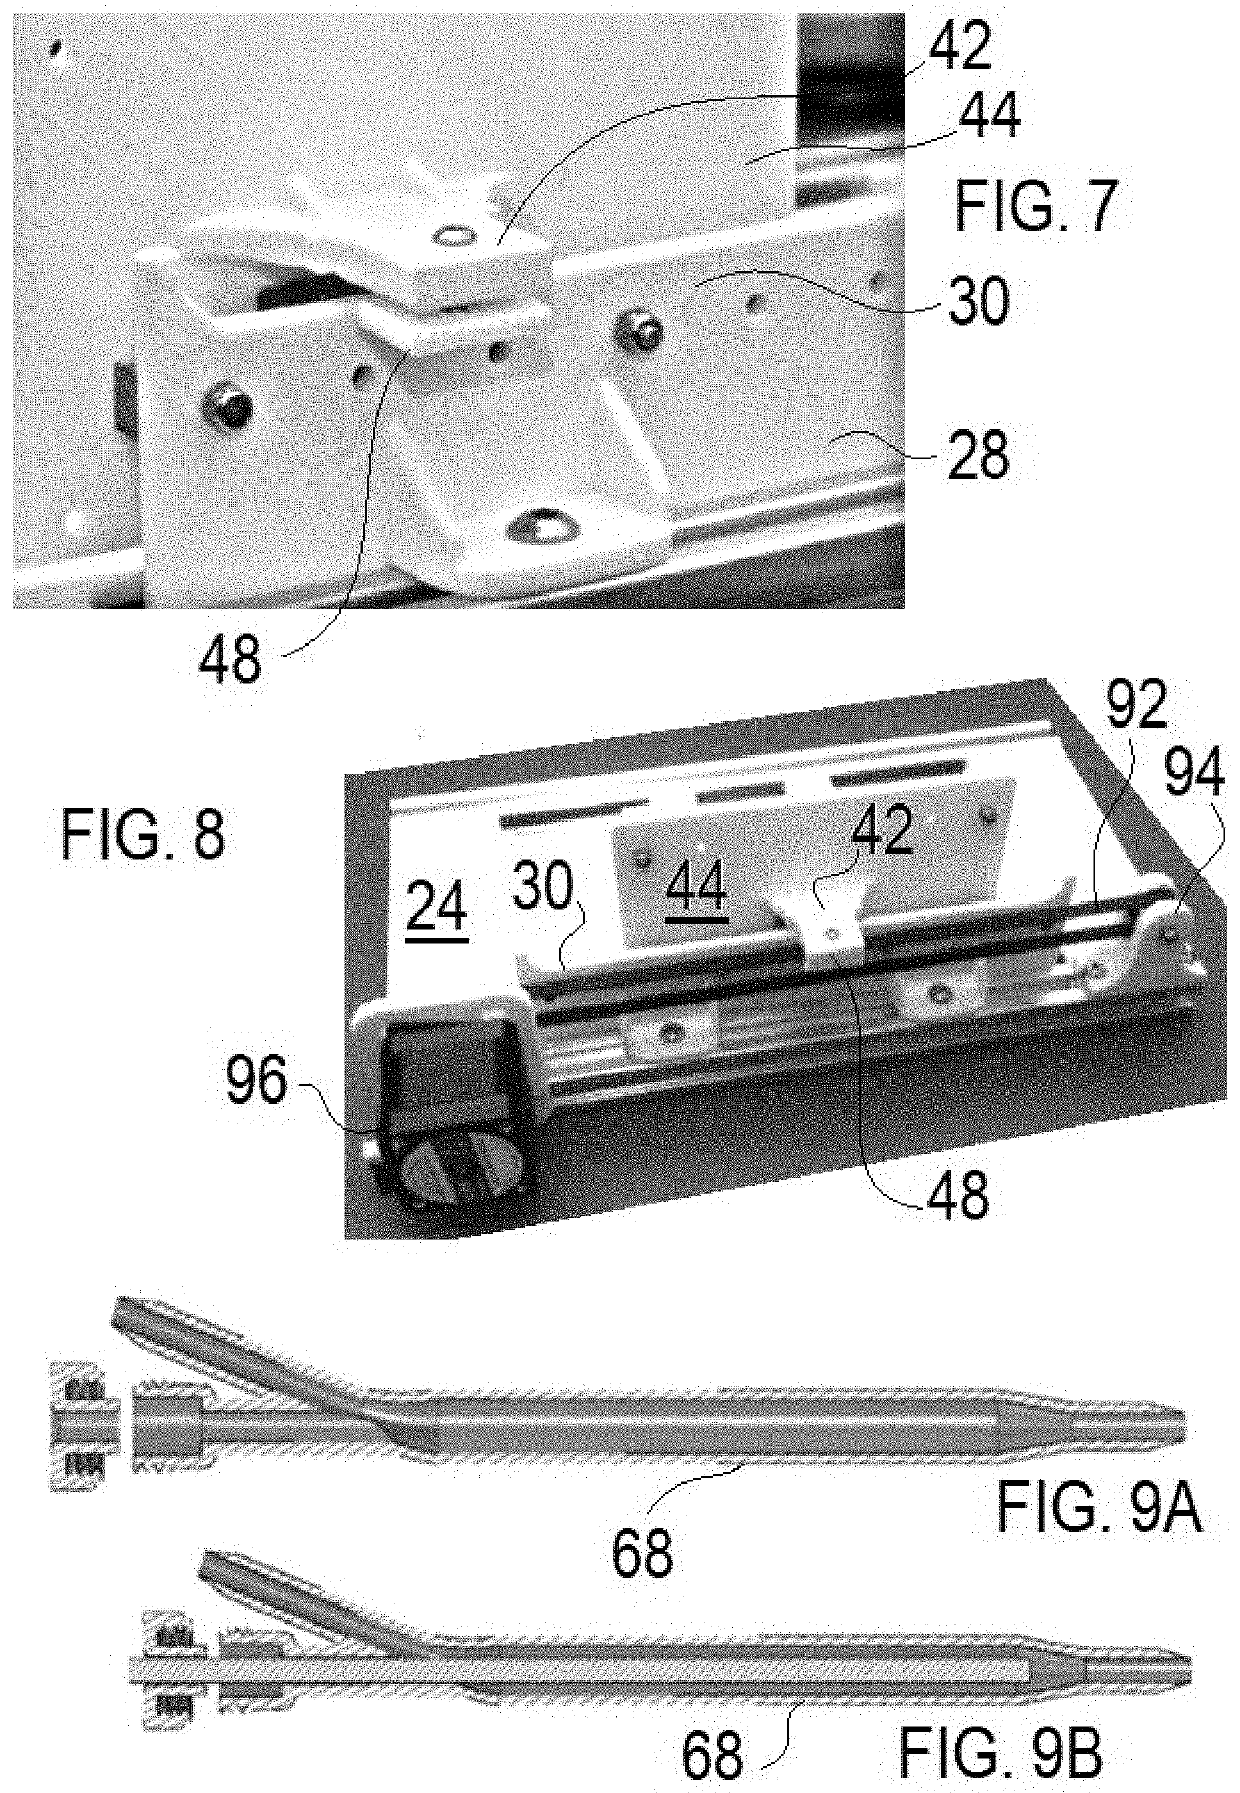 Flow Based Biological Testing Platform and Noncircular Fluid Test Loops Therefor